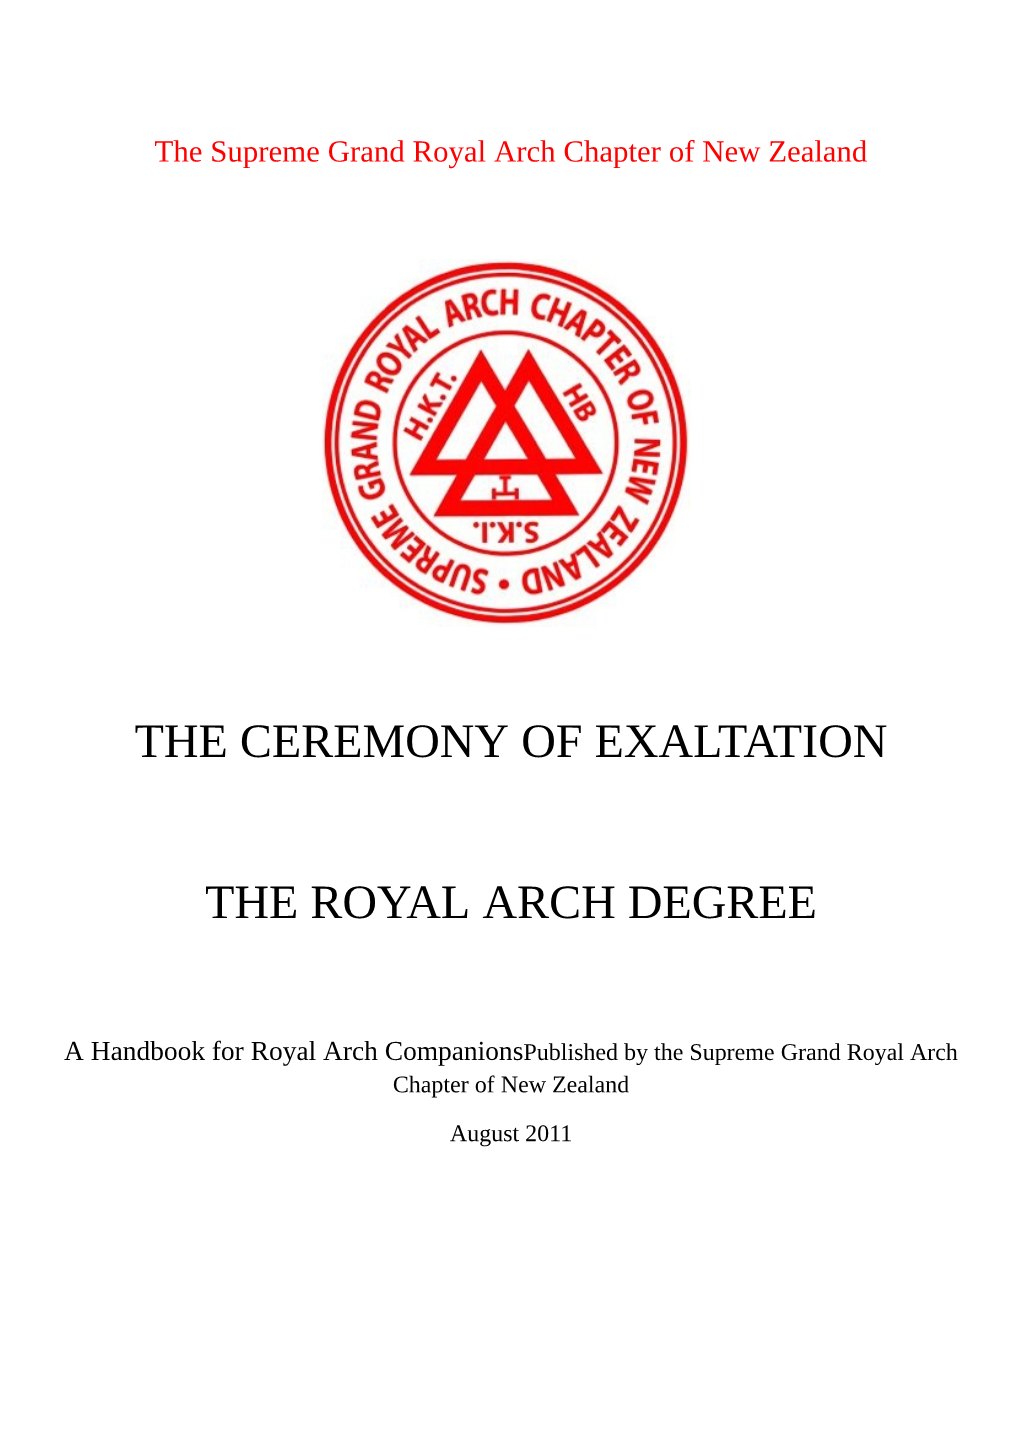 The Ceremony of Exaltation The